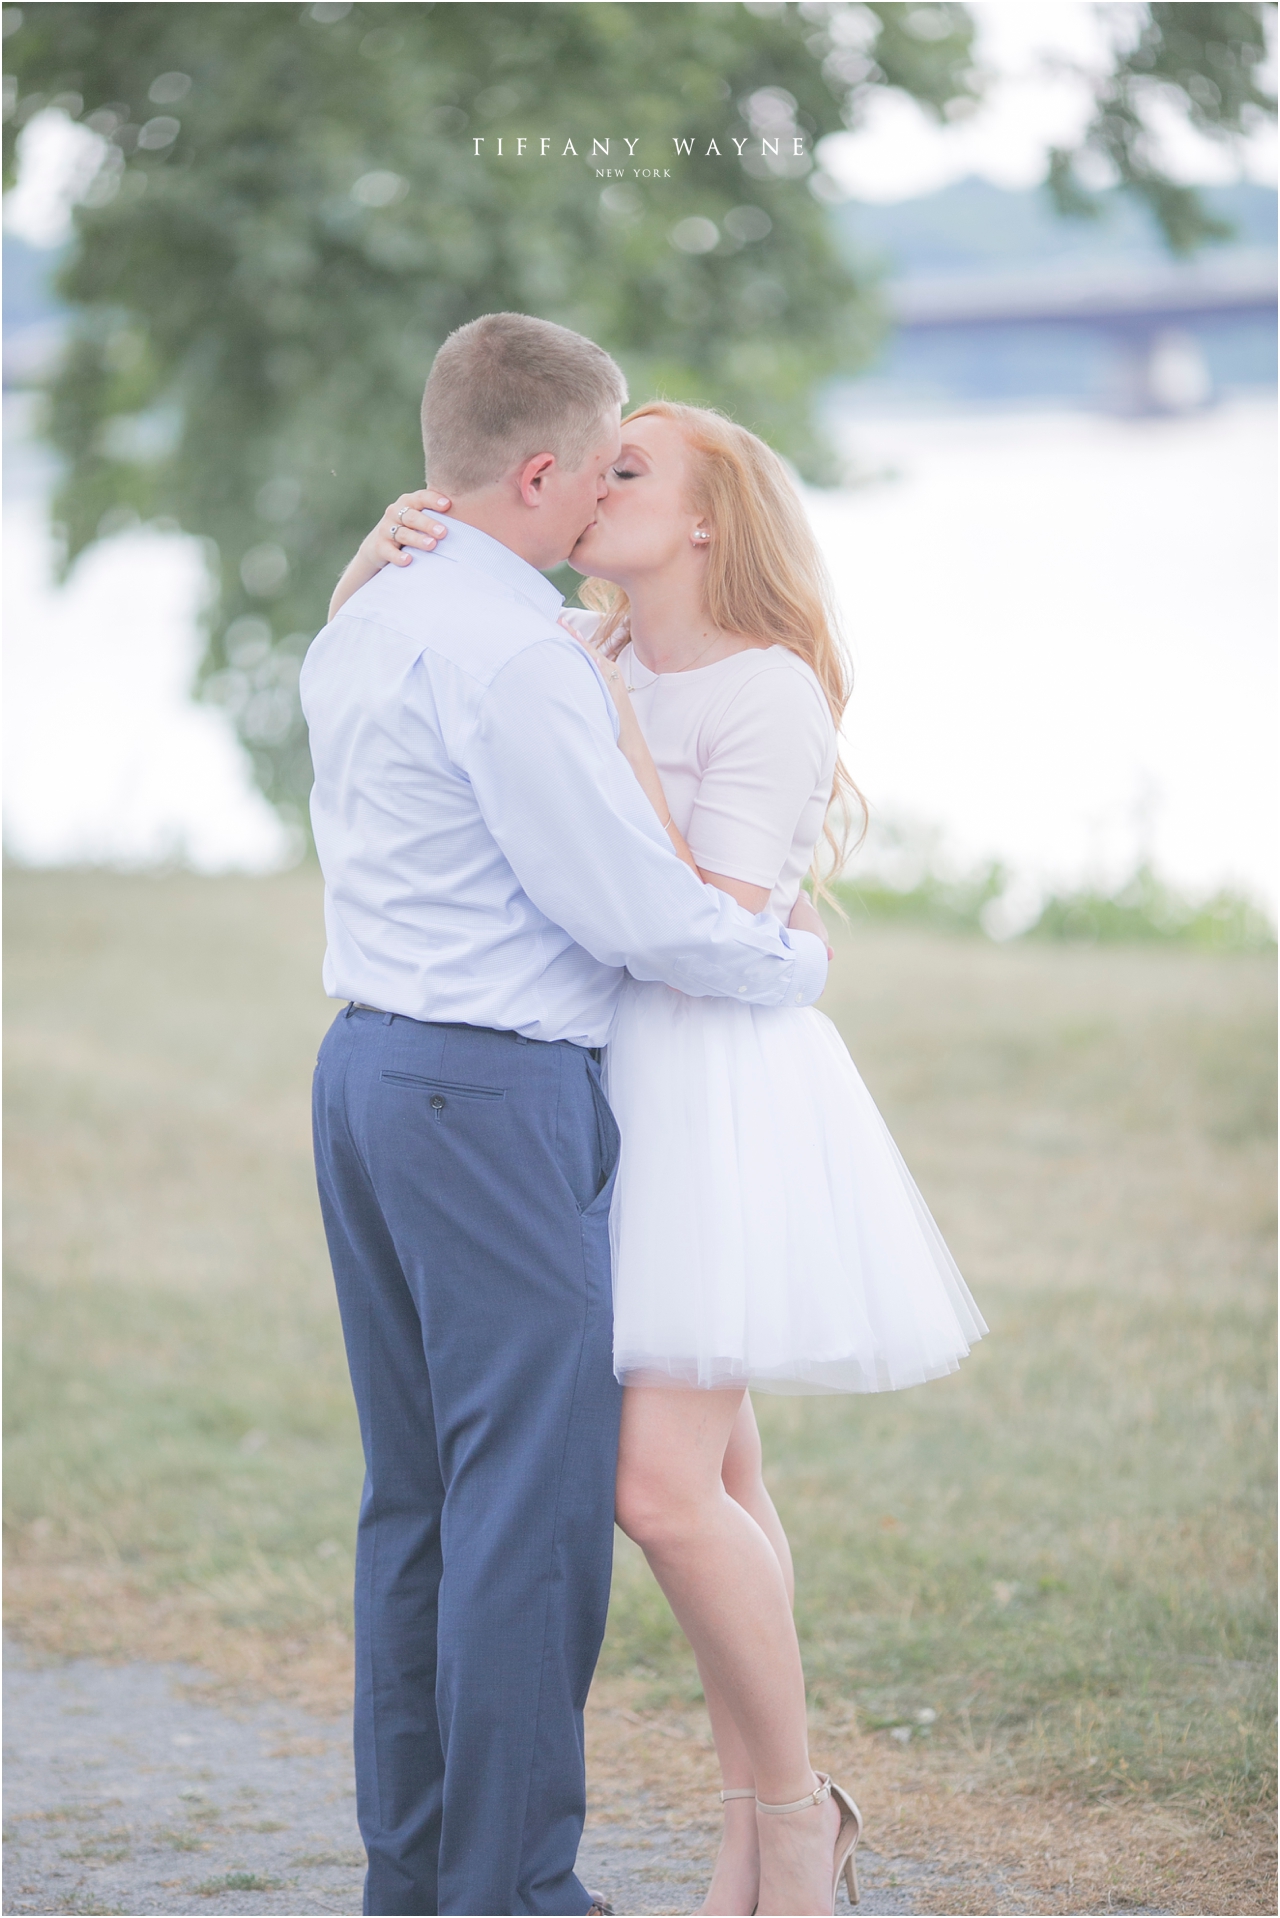 sweet kiss during New York engagement session 